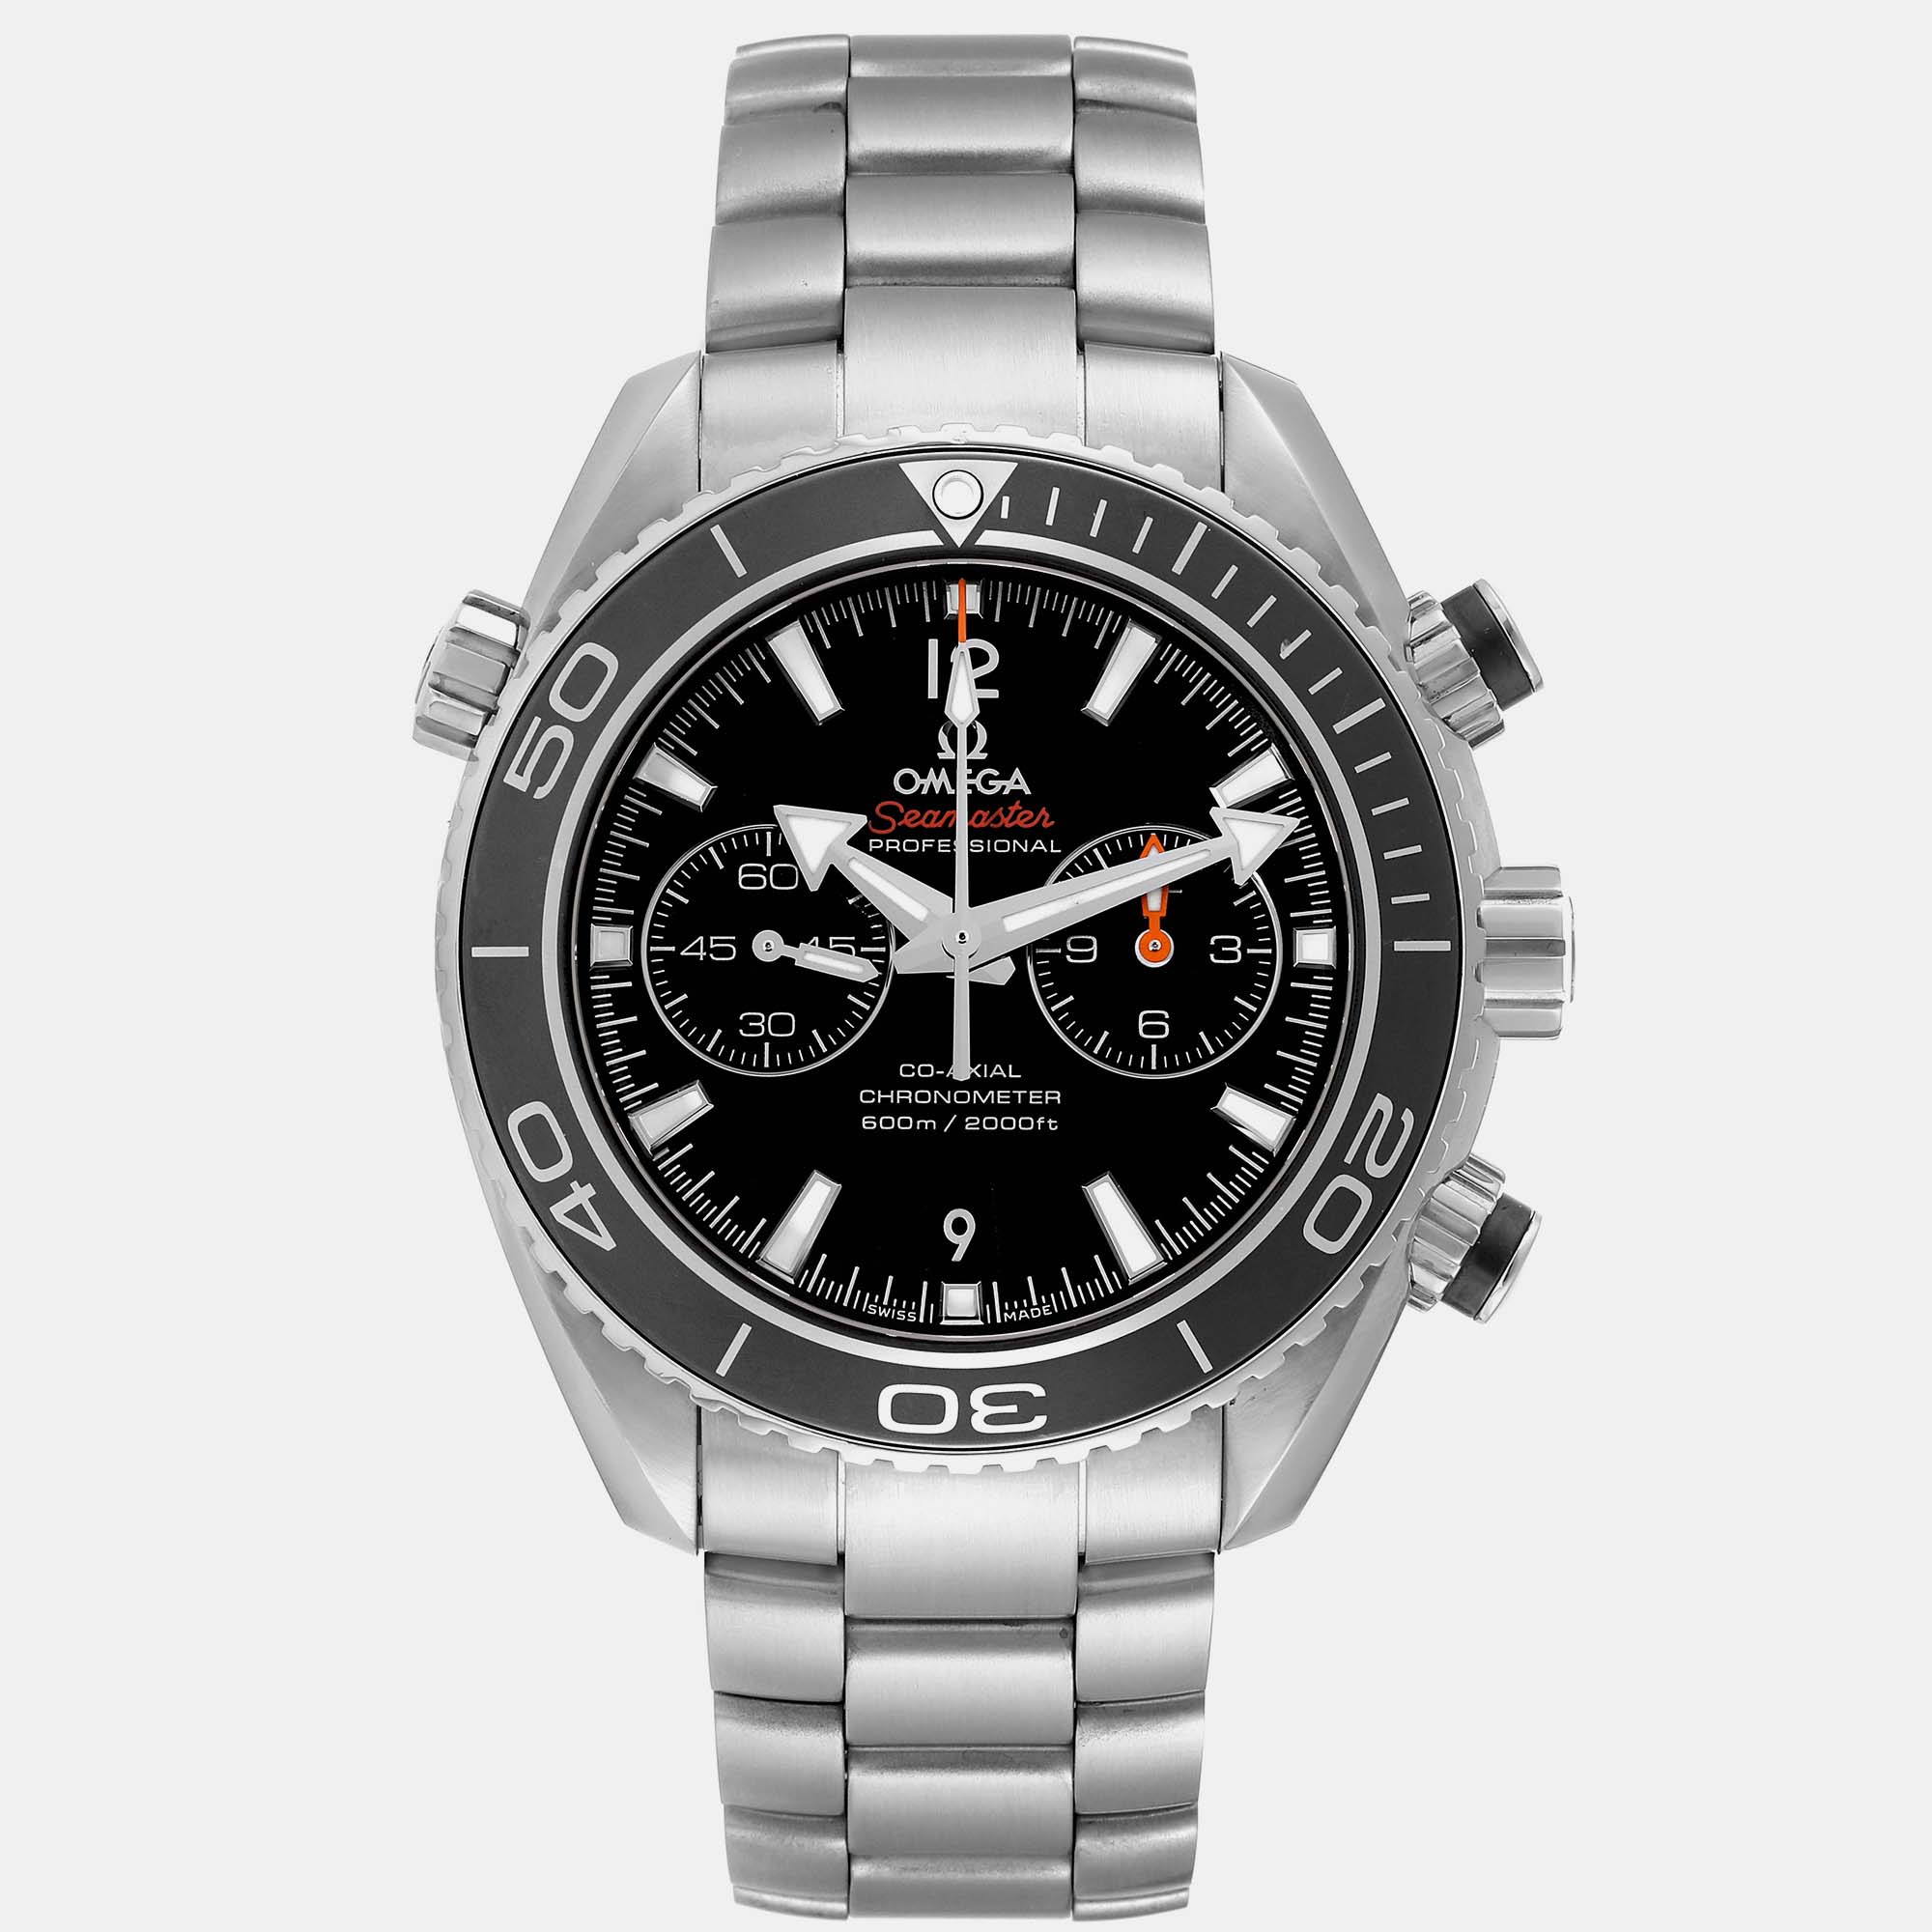 Omega black stainless steel seamaster planet ocean 232.30.46.51.01.001 automatic men's wristwatch 45.5 mm